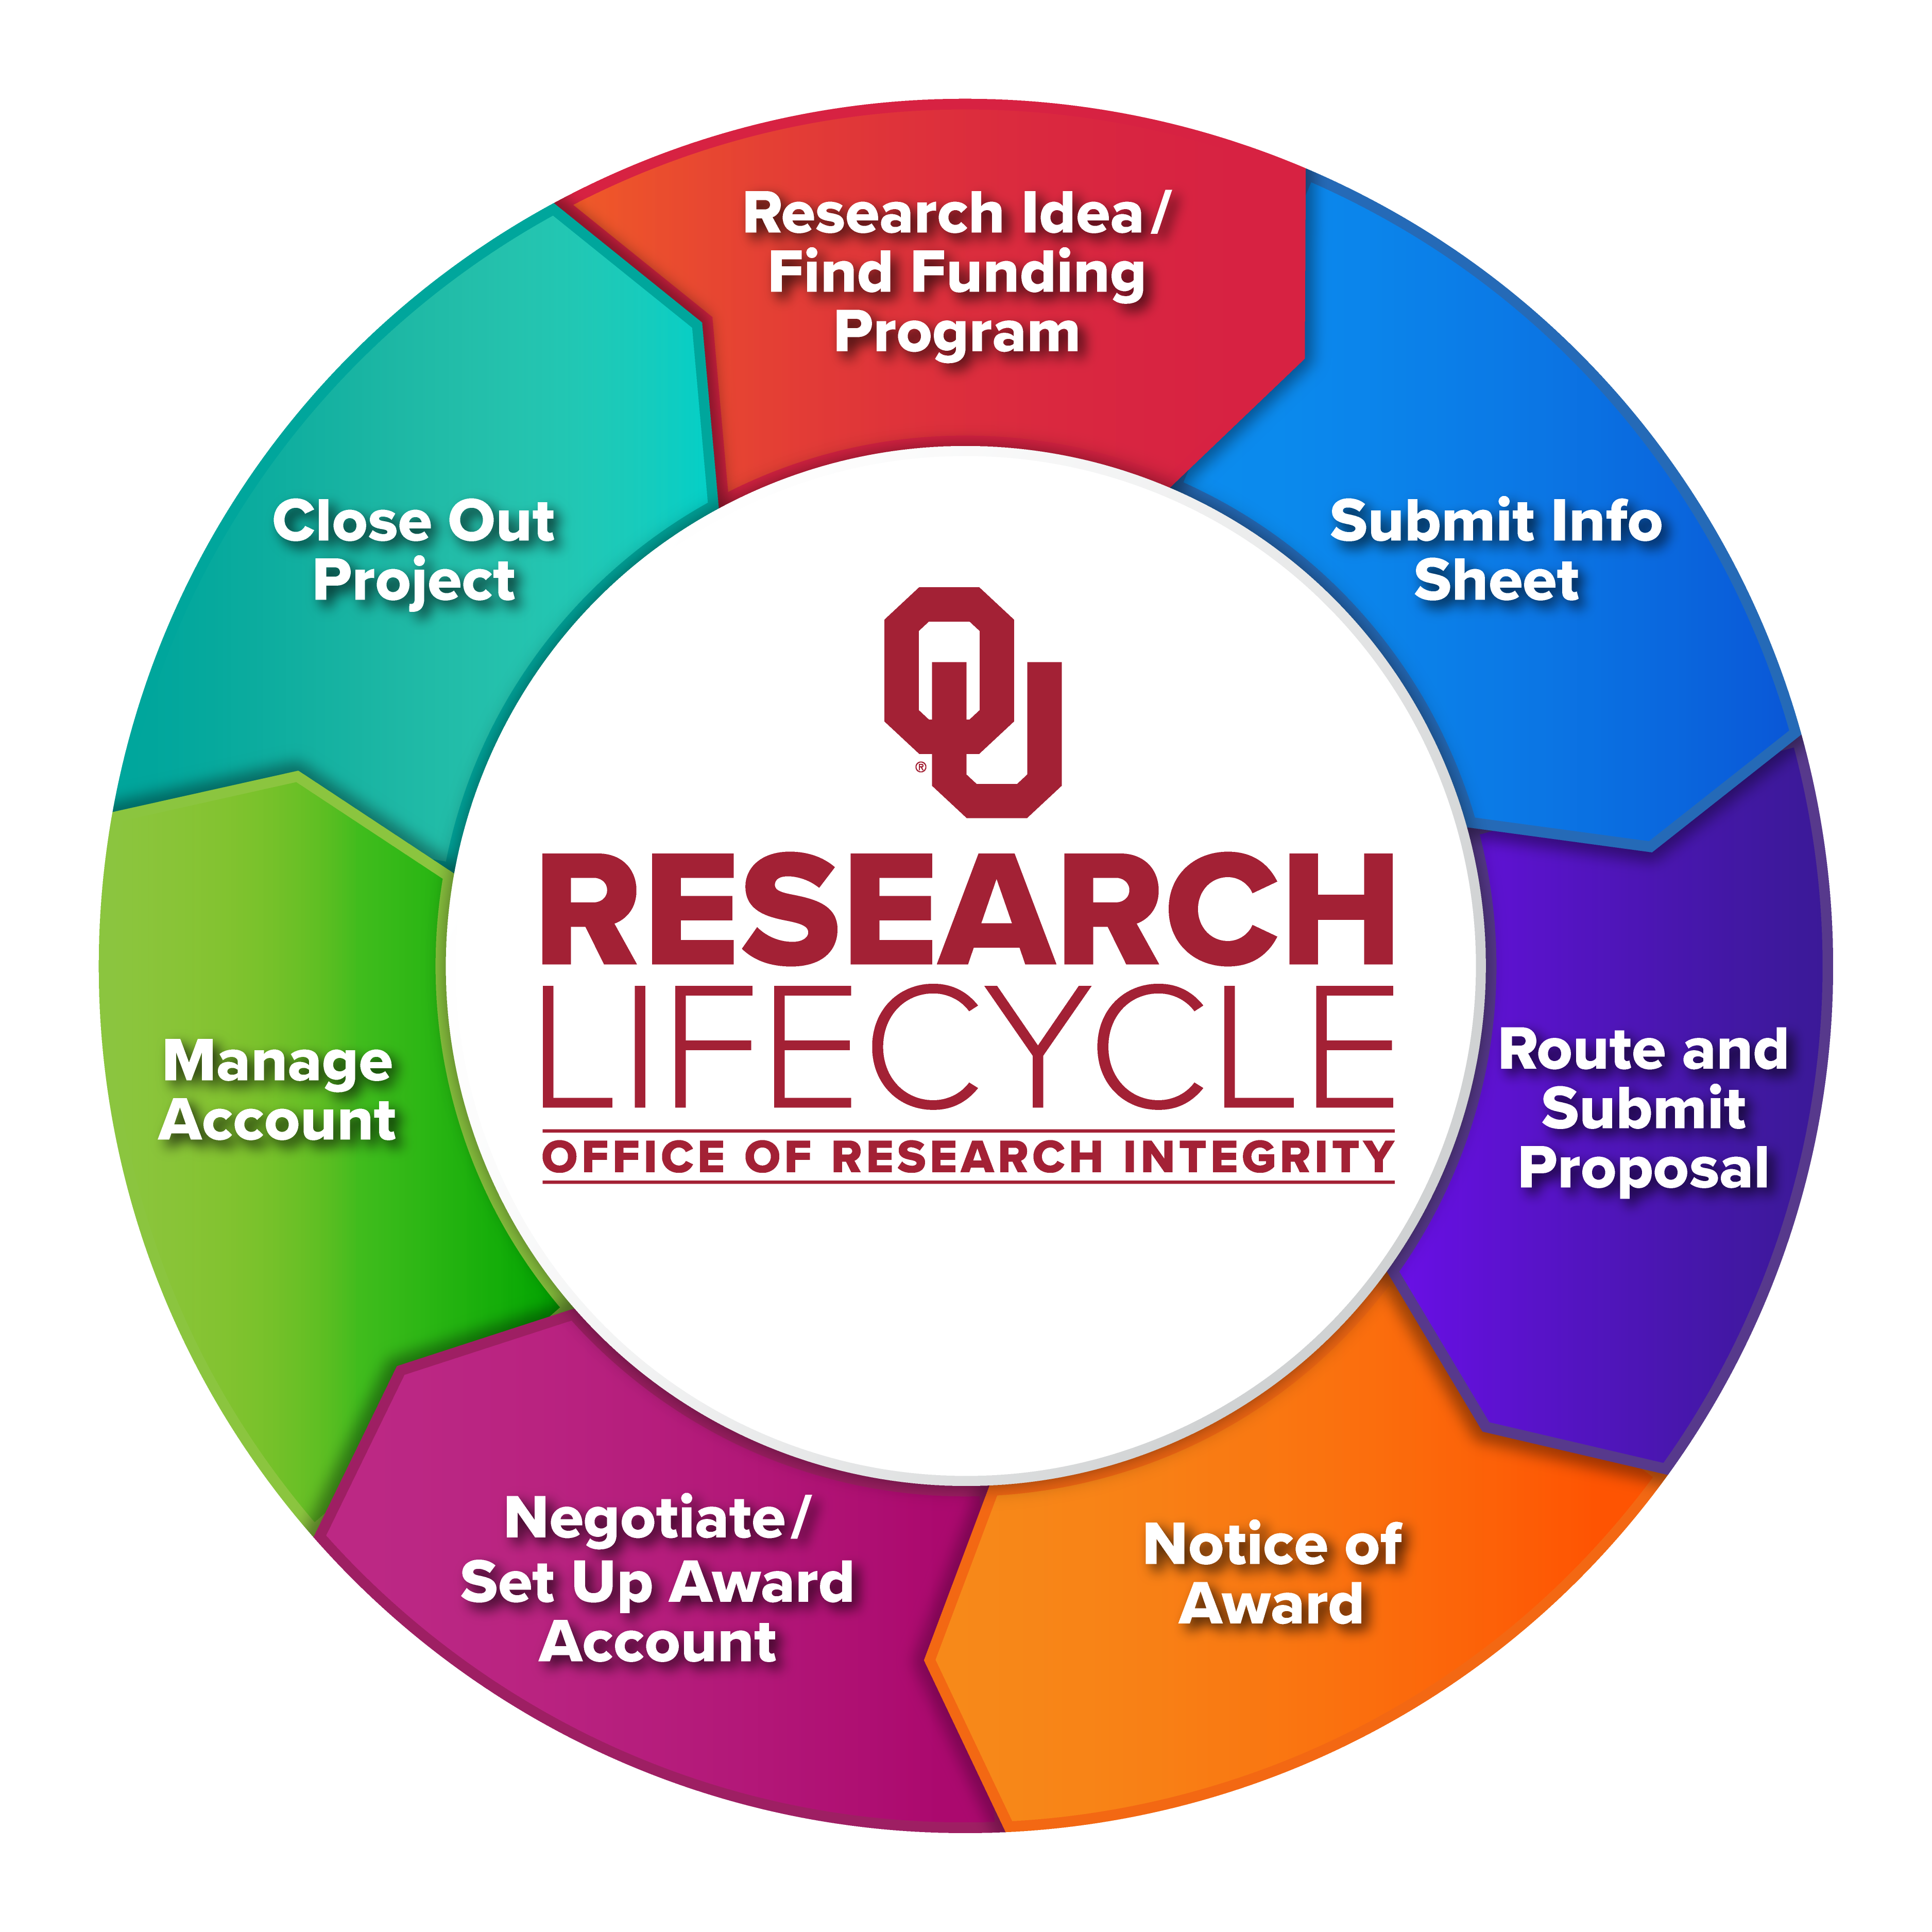 ou research life cycle image. step one research idea. step 2 submit info sheet. step three route and submit proposal. step four notice of award. step five negotiate. step six manage account. step seven close out project.